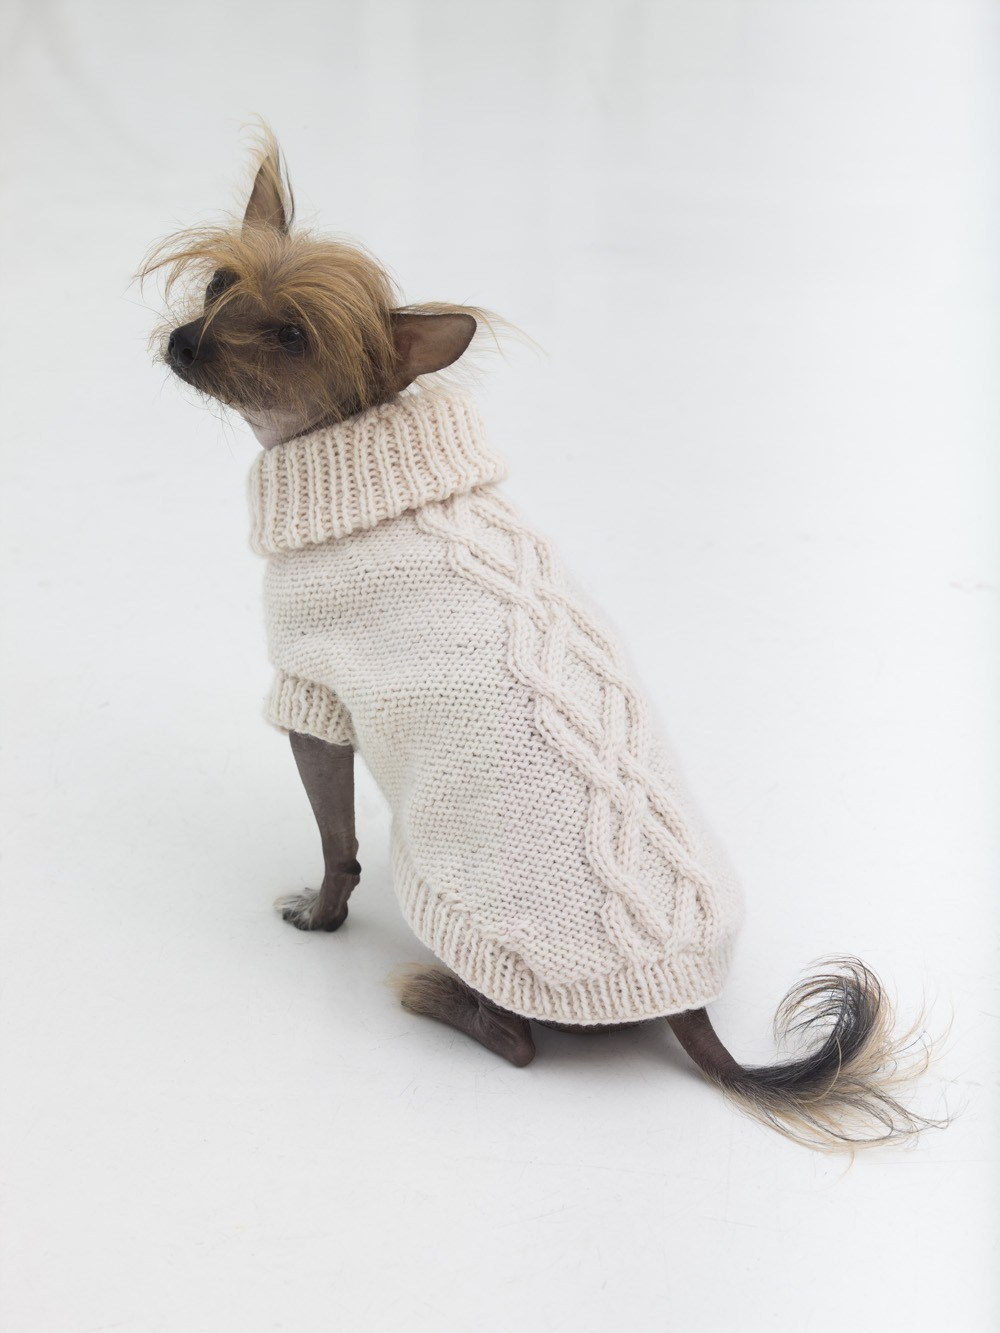 Easy Knitting Pattern For Dog Coat 10 Stunning Examples Of Beautiful Fall Dog Sweaters Free Knitting